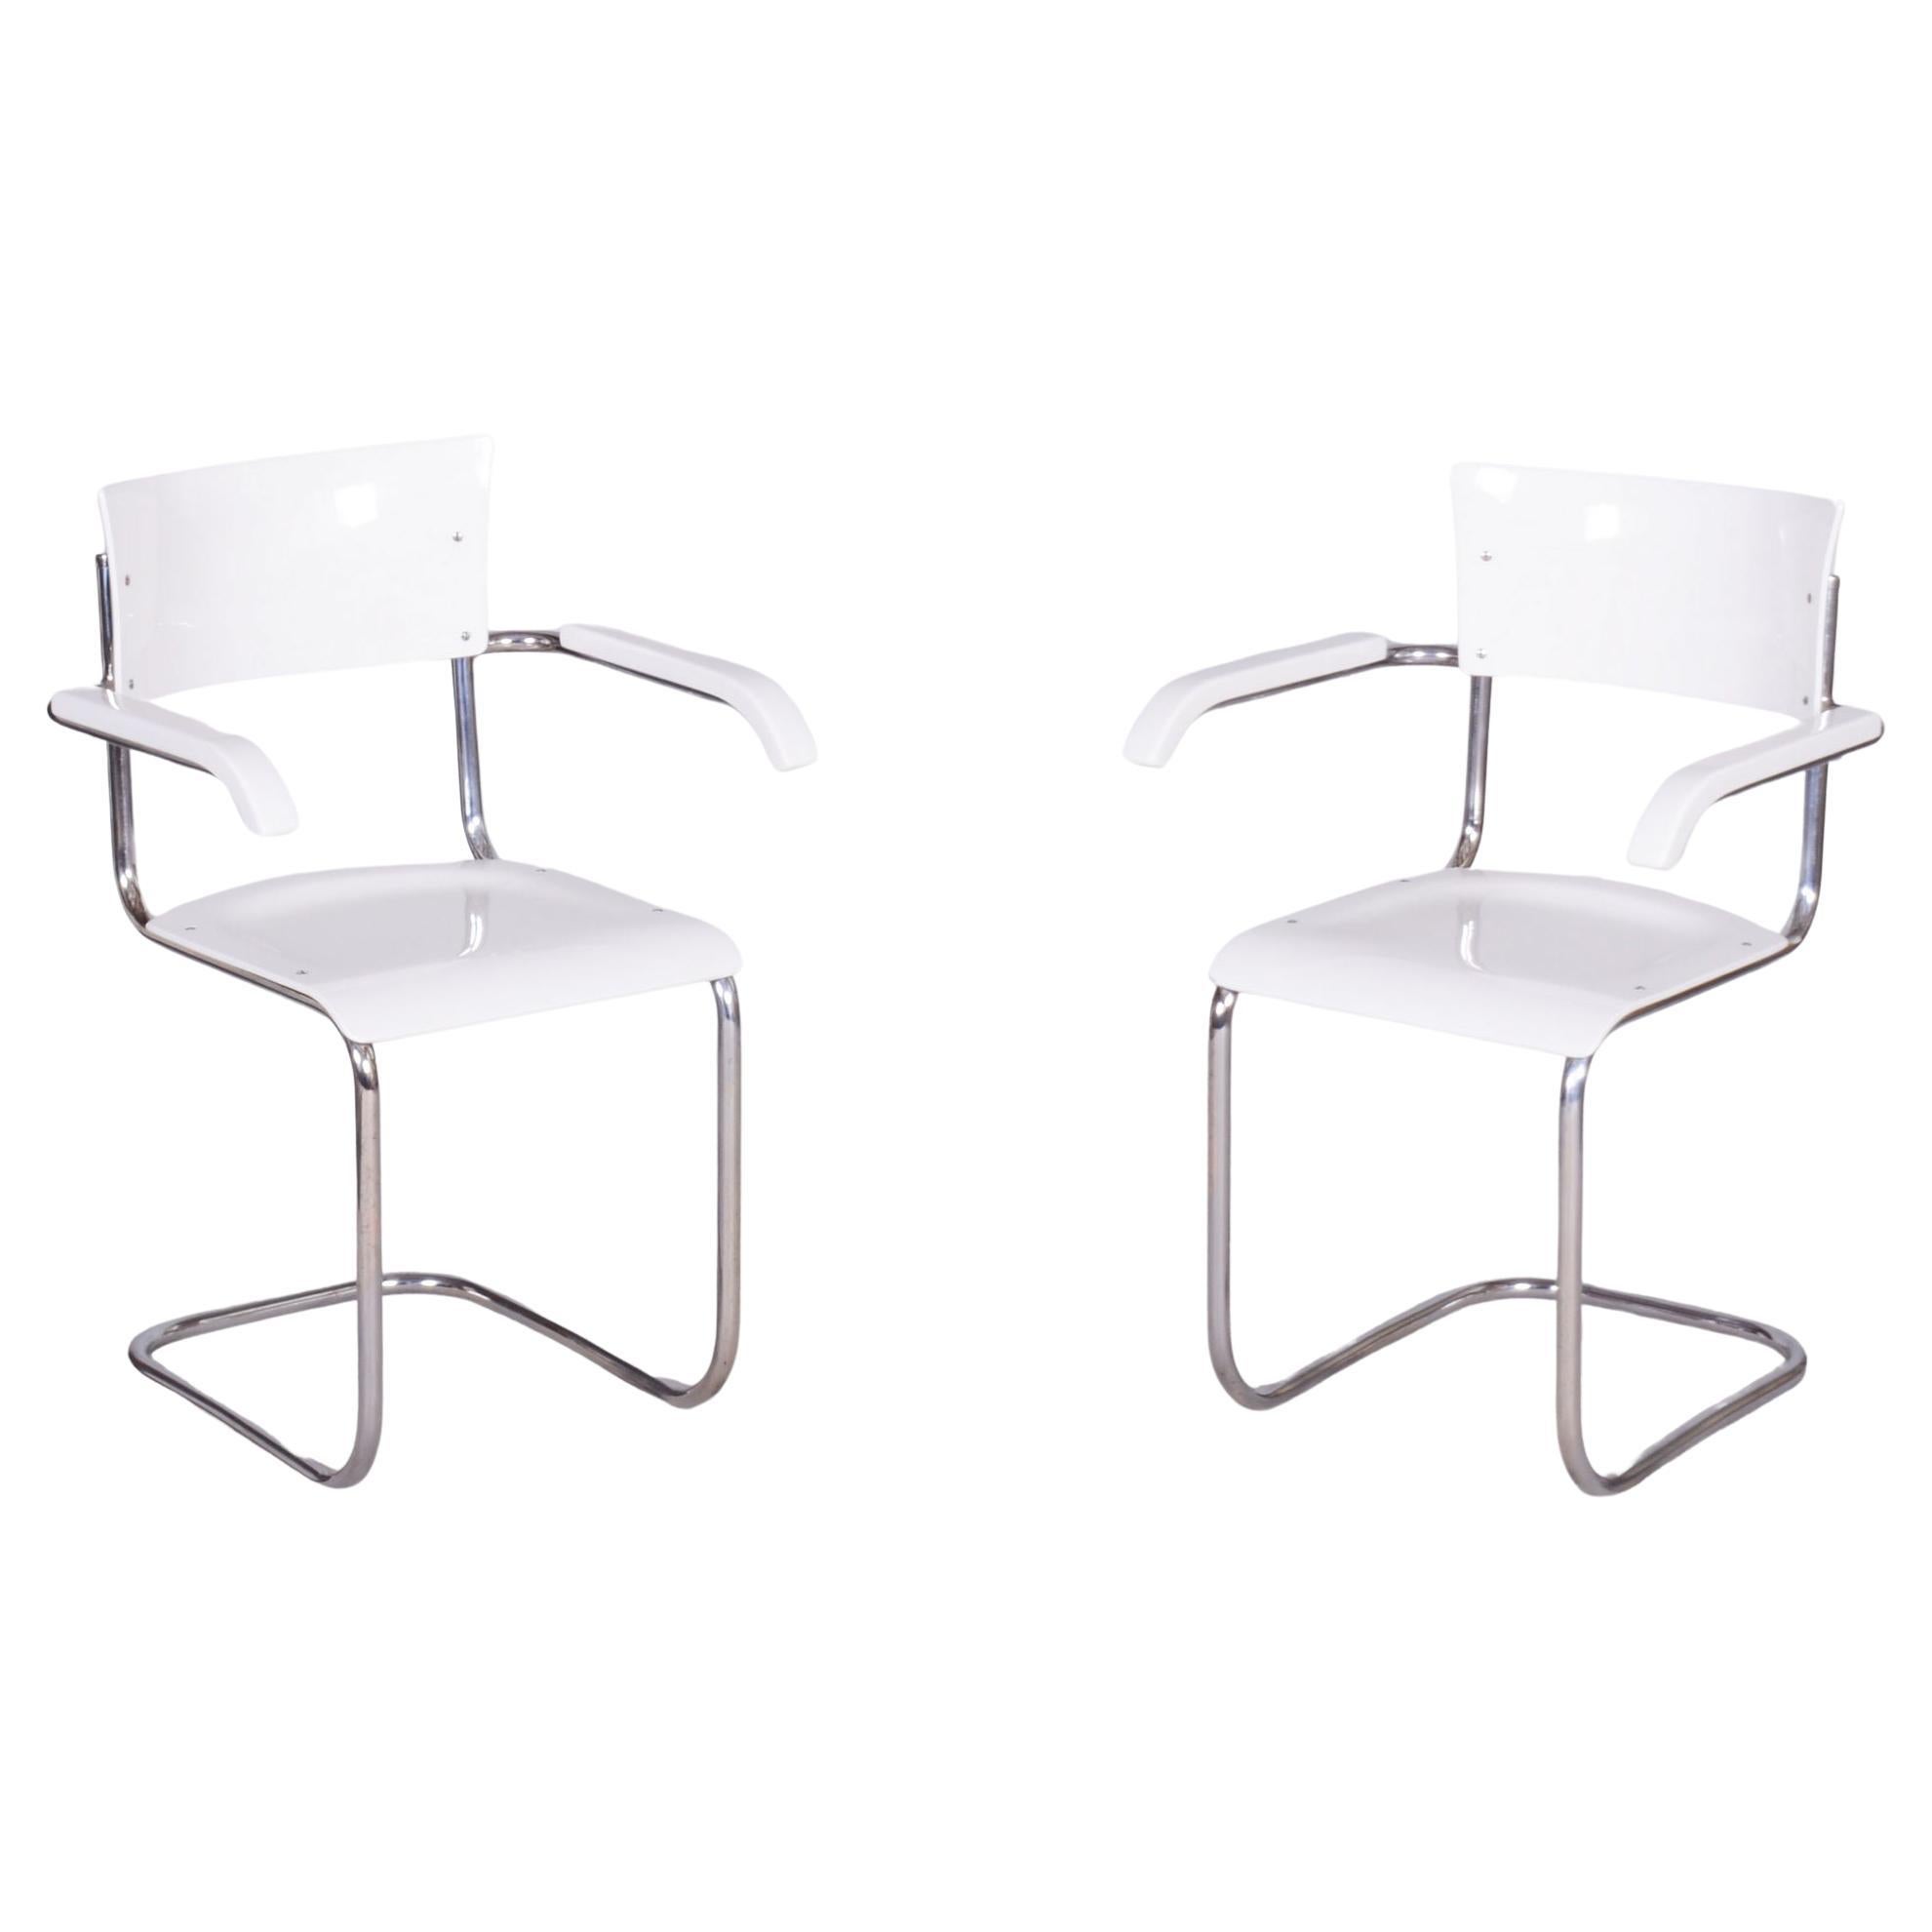 Restored Bauhaus Pair of Chairs, by Mart Stam, Chrome, Germany, 1930s